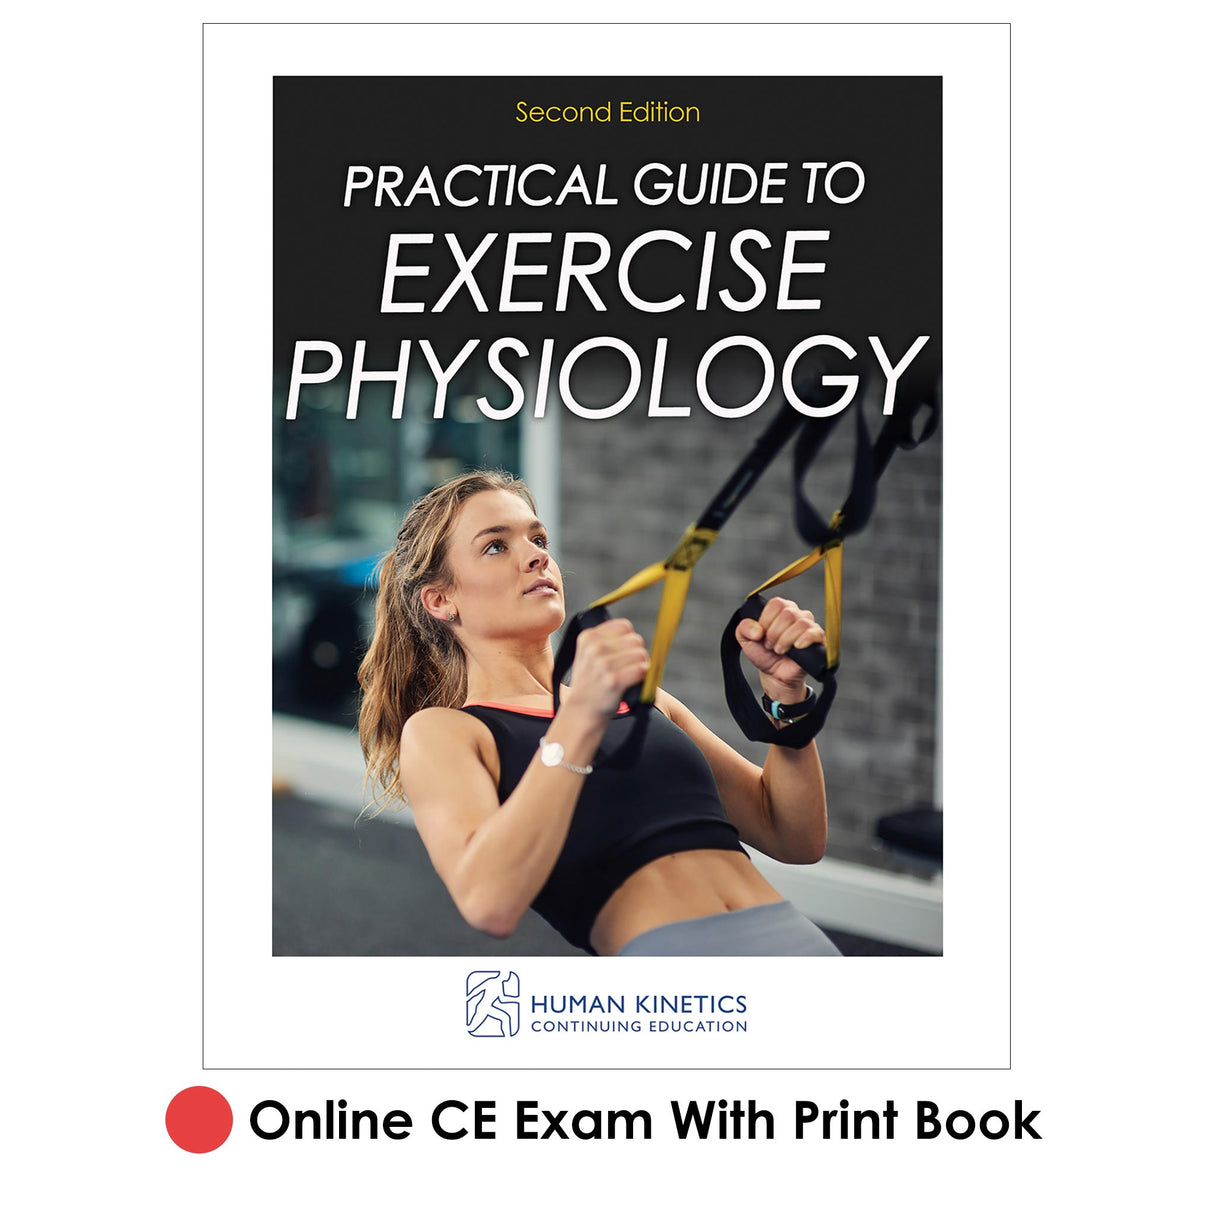 Practical Guide to Exercise Physiology 2nd Edition Online CE Exam With Print Book